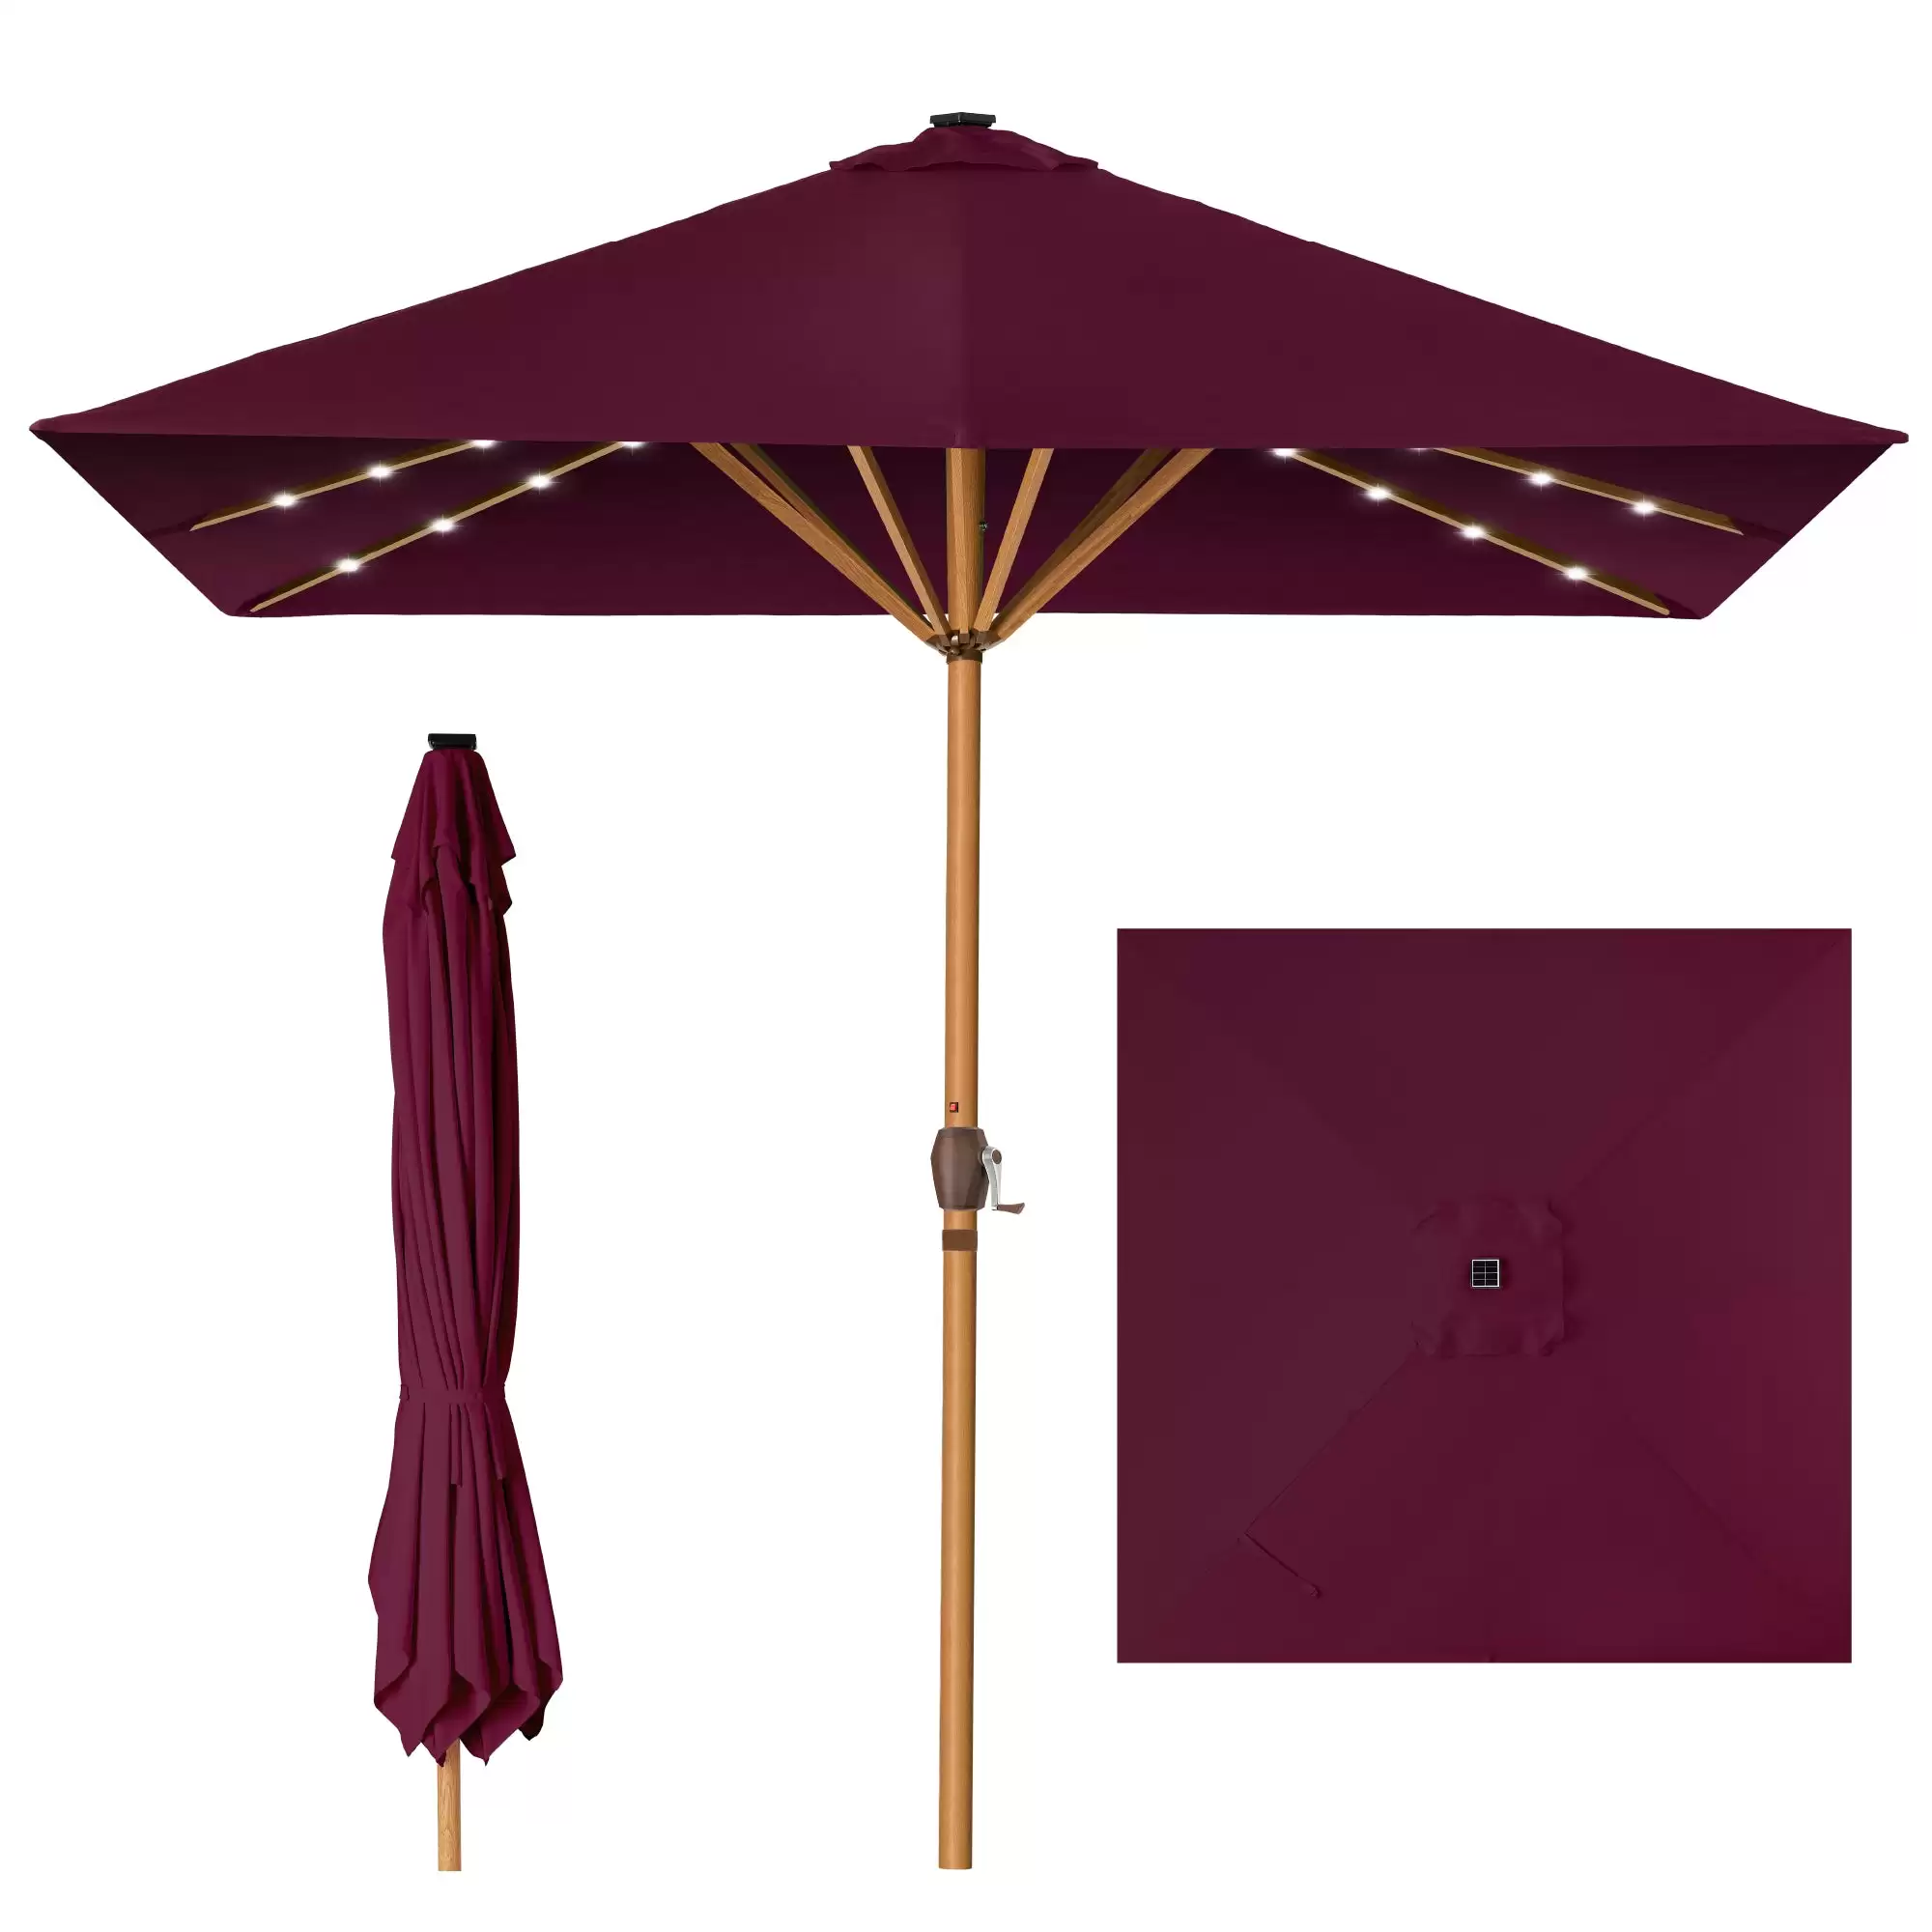 Pay Only $99.99 For Square Solar Led Lighted Patio Umbrella W/ Faux Wood Texture - 9ft With This Discount Coupon At Bestchoiceproducts